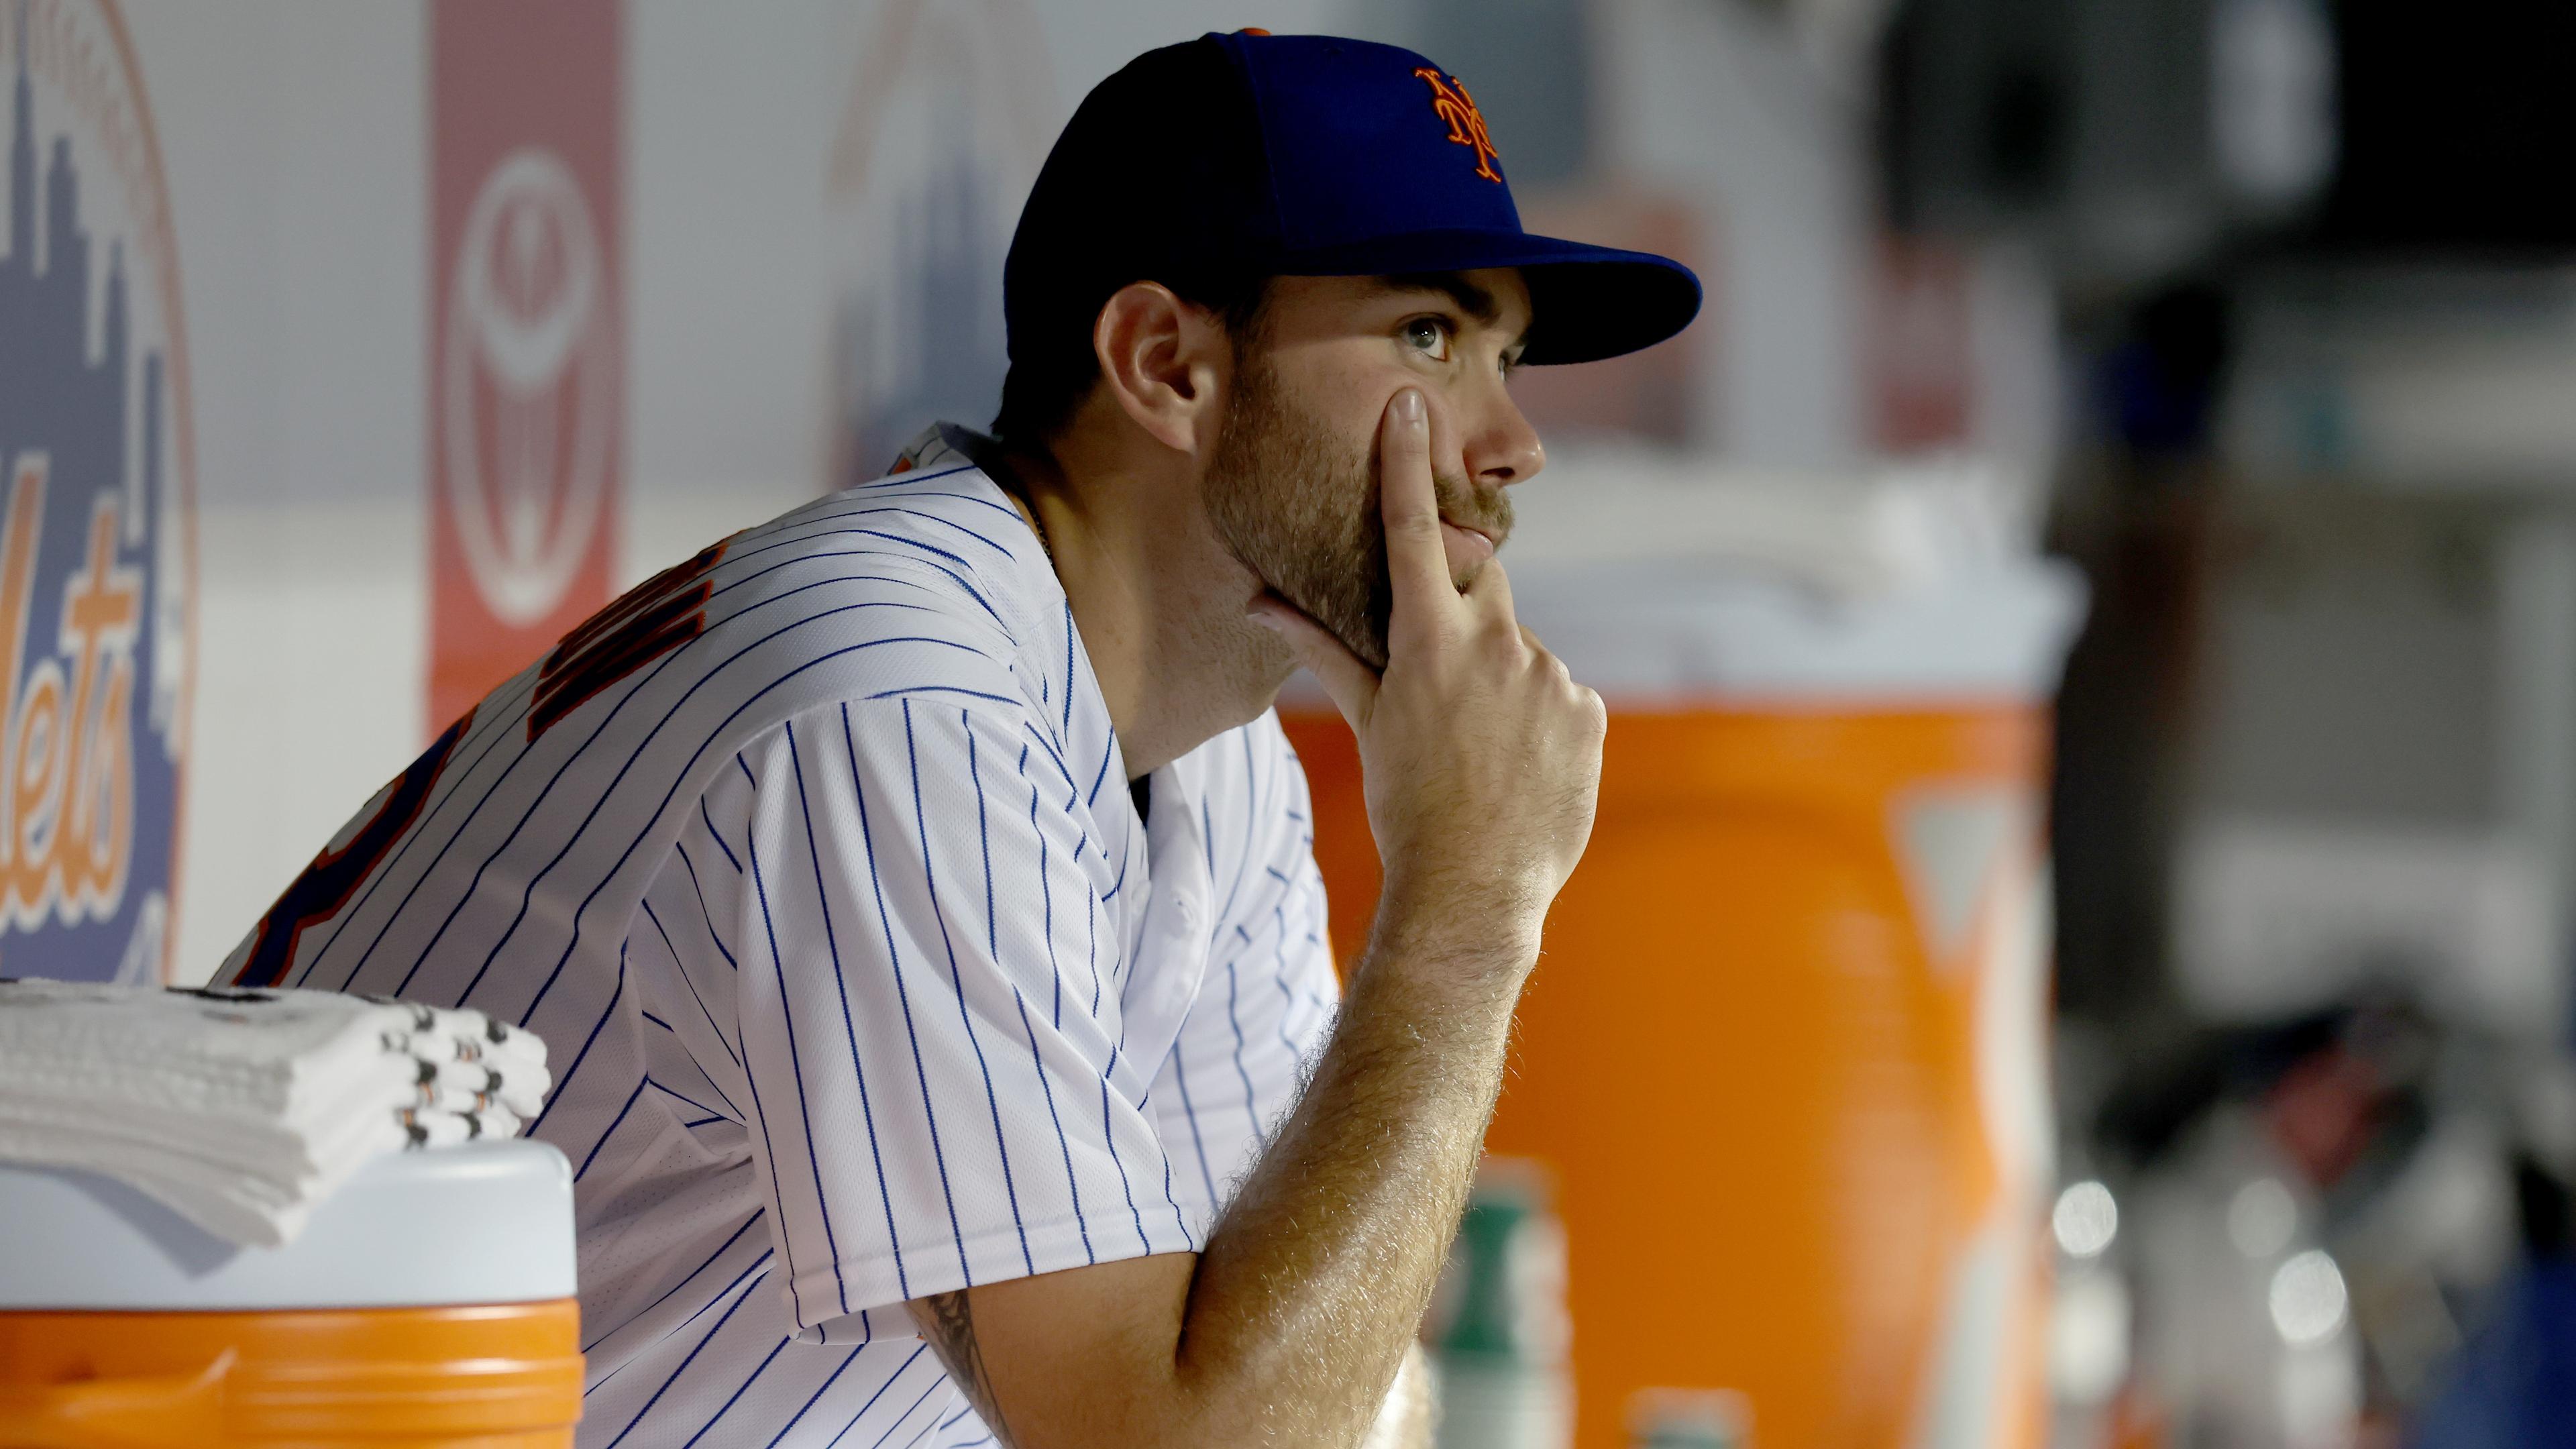 Jun 15, 2022; New York City, New York, USA; New York Mets starting pitcher David Peterson (23) reacts in the dugout after being taken out of the game against the Milwaukee Brewers during the fifth inning at Citi Field. Mandatory Credit: Brad Penner-USA TODAY Sports / Brad Penner-USA TODAY Sports